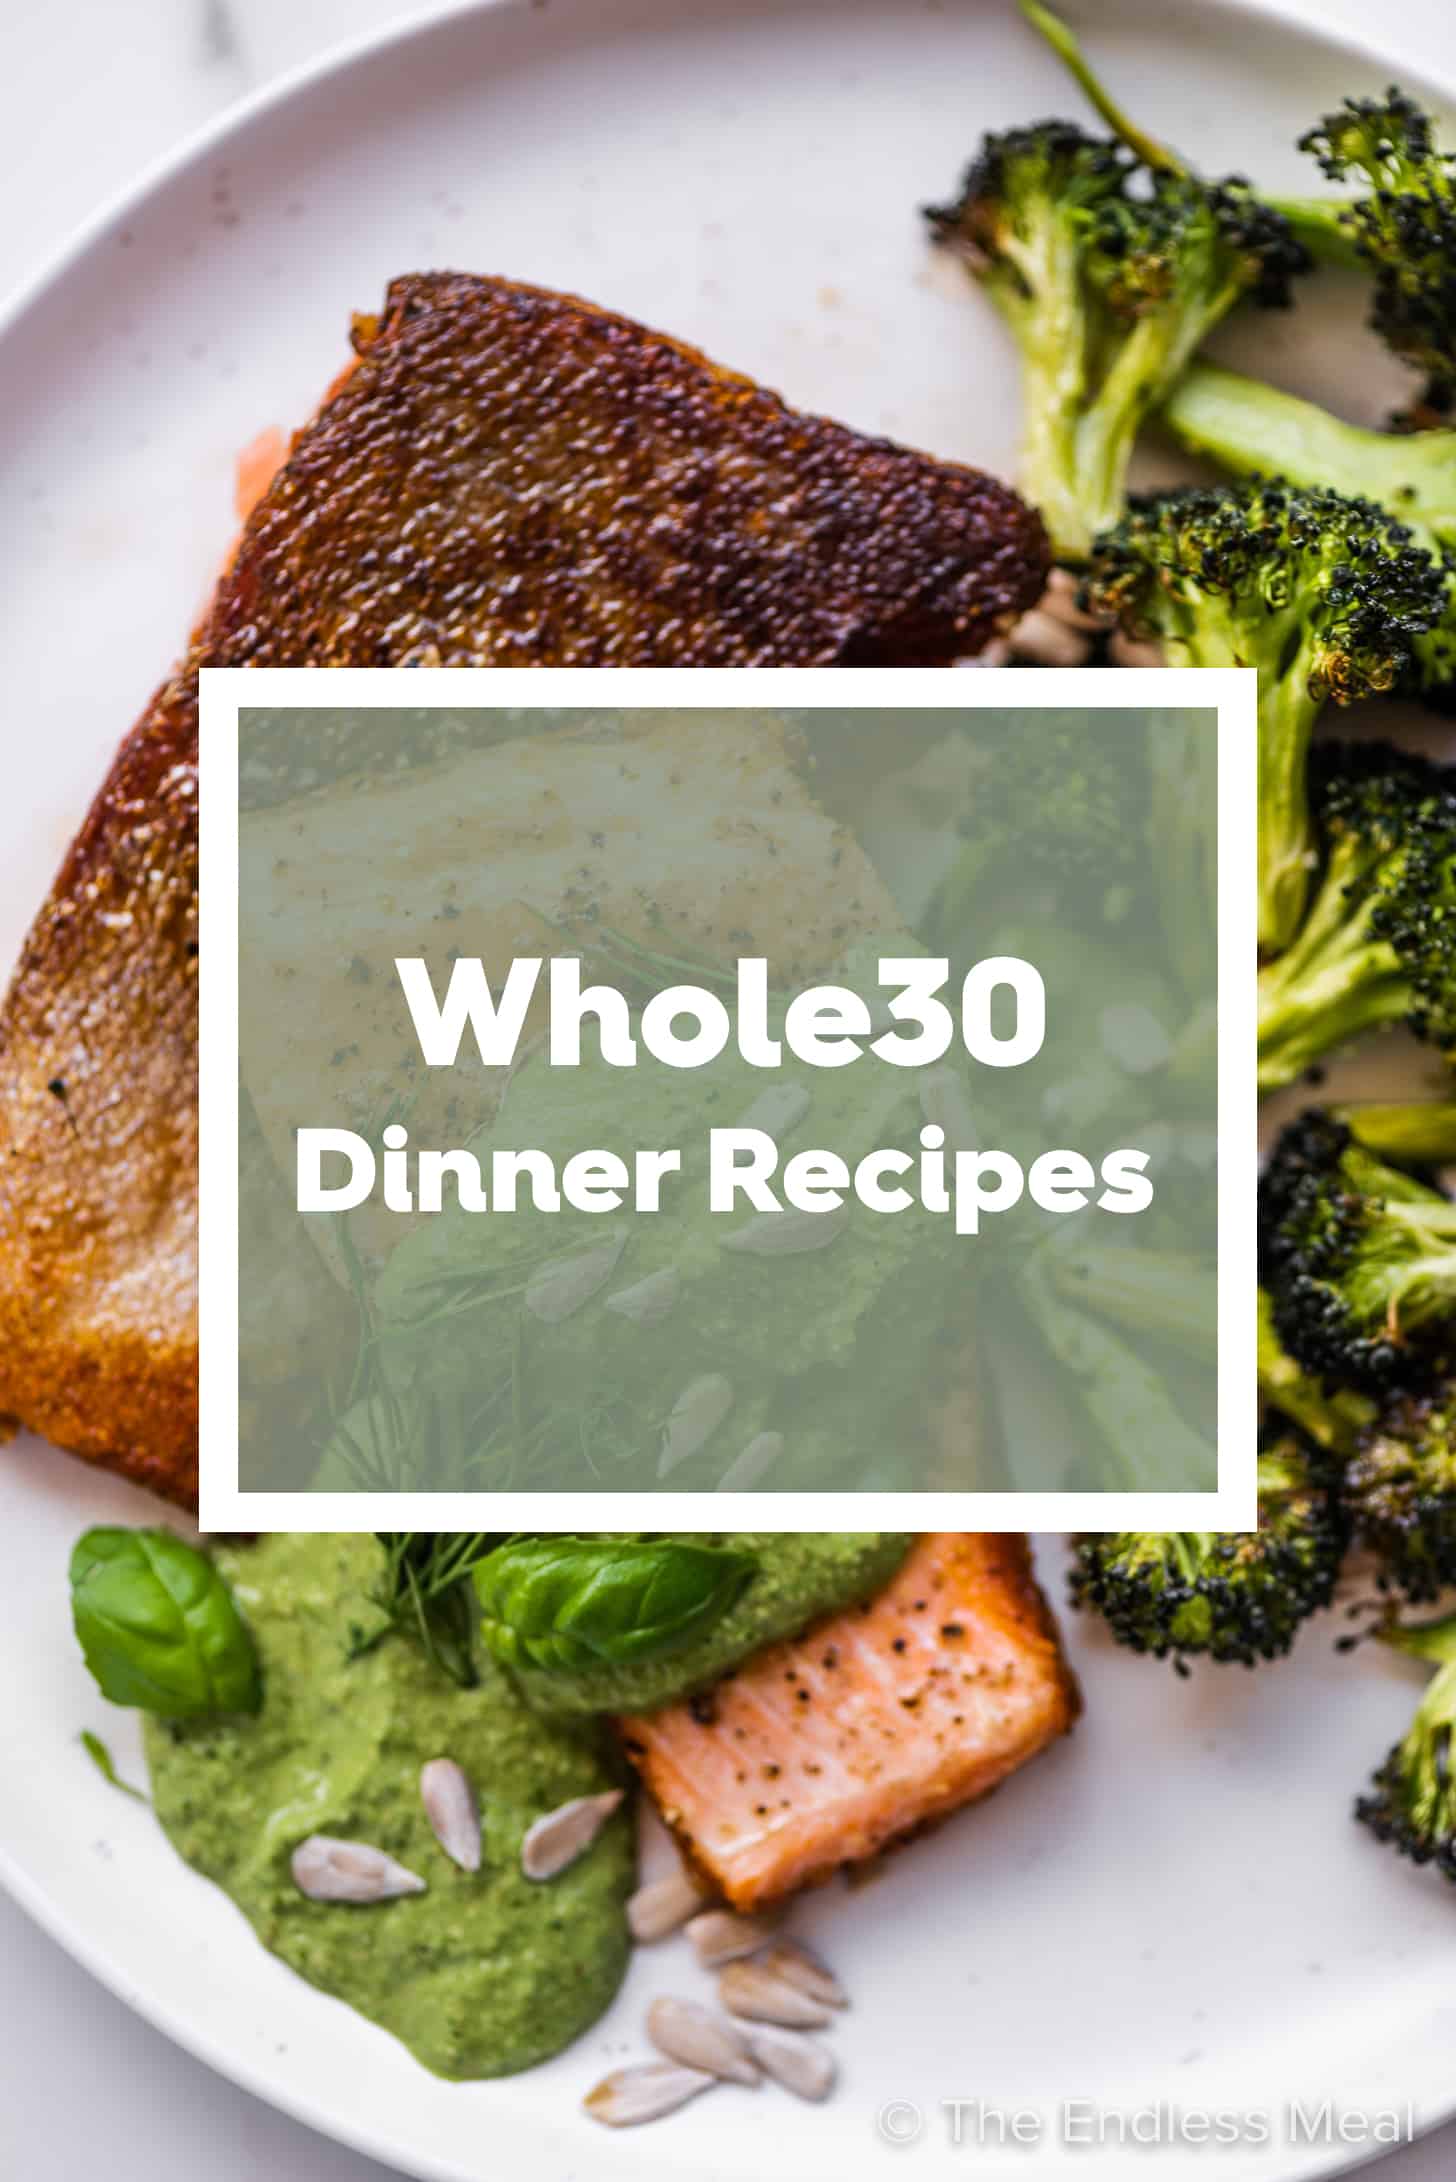 A dinner plate with salmon and broccoli with the words Whole30 Dinner Recipes on top.